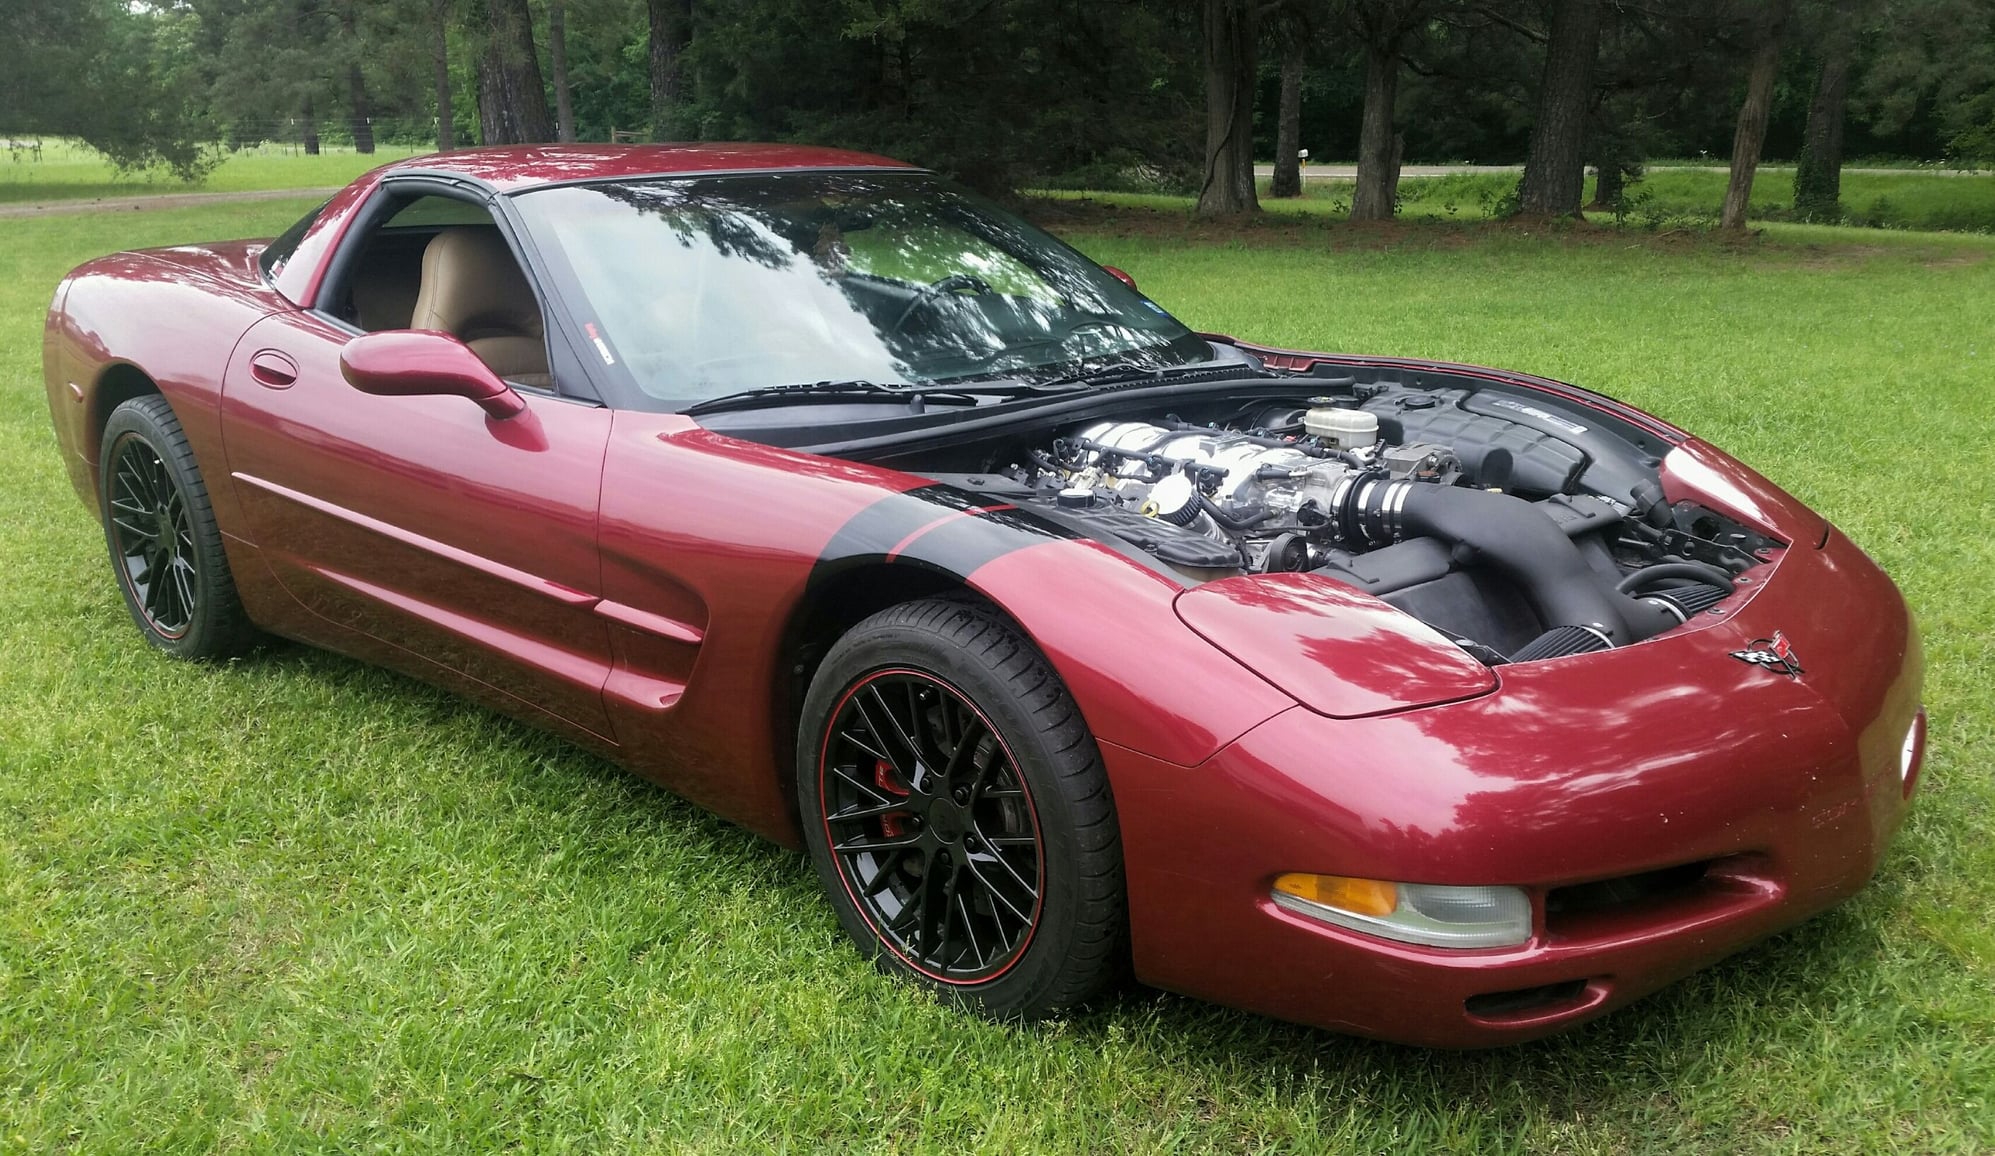 2001 Chevrolet Corvette - 01' Z51 C5 Forsale (Tail light issues) - Used - VIN 1G1YY22G615114258 - 165,000 Miles - 8 cyl - 2WD - Manual - Coupe - Red - Tenaha, TX 75974, United States